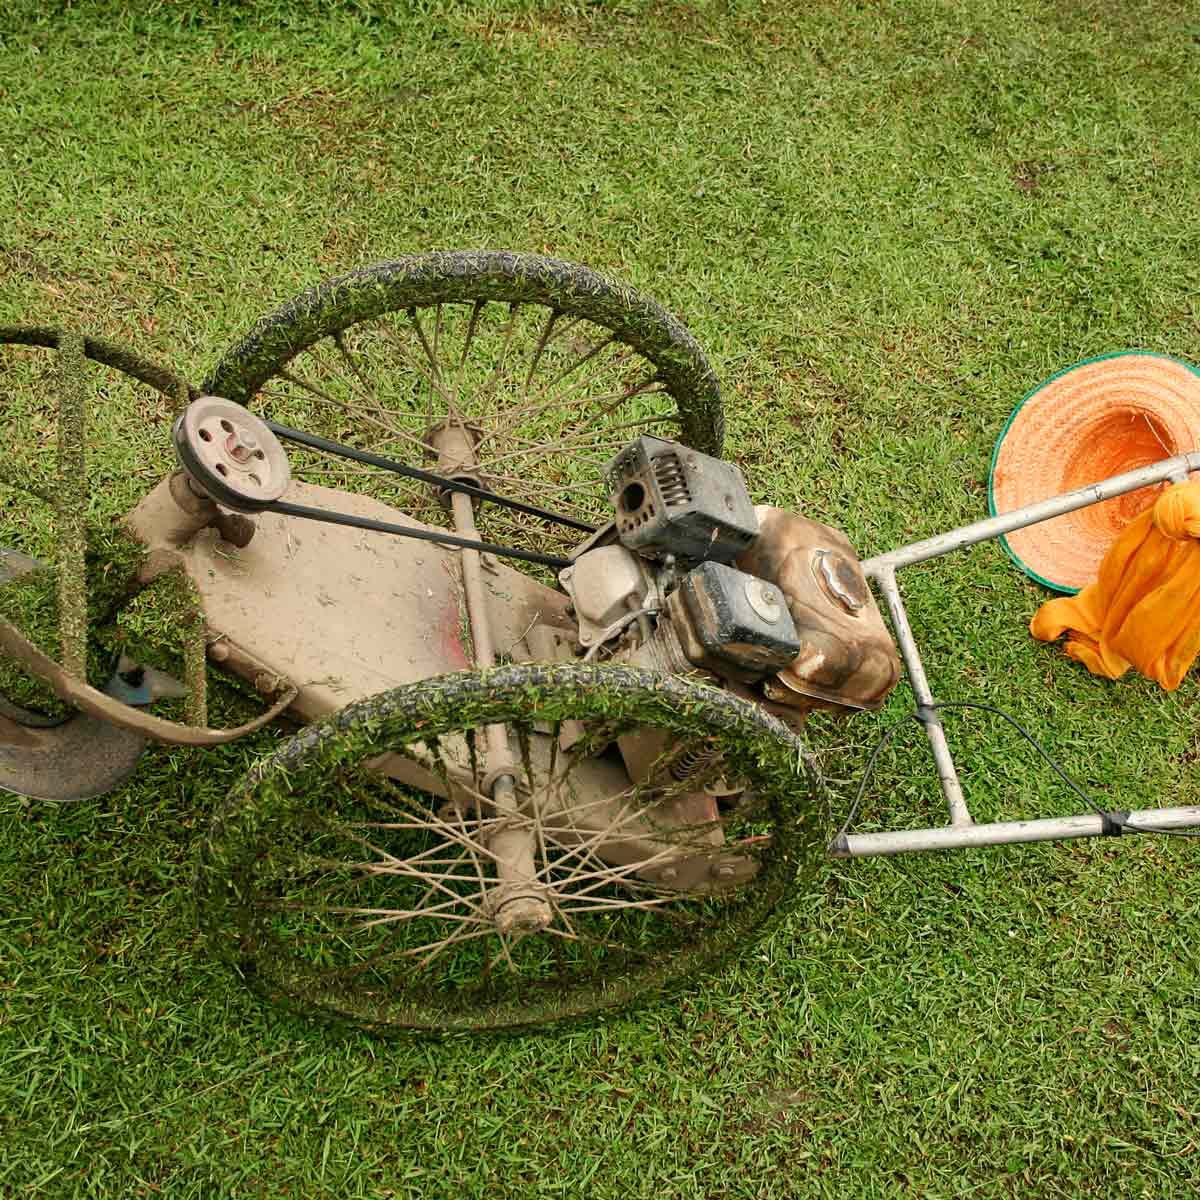 Antique 16 inch Wards Lakeside rotary Reel Lawn Mower push vintage manual  1950S